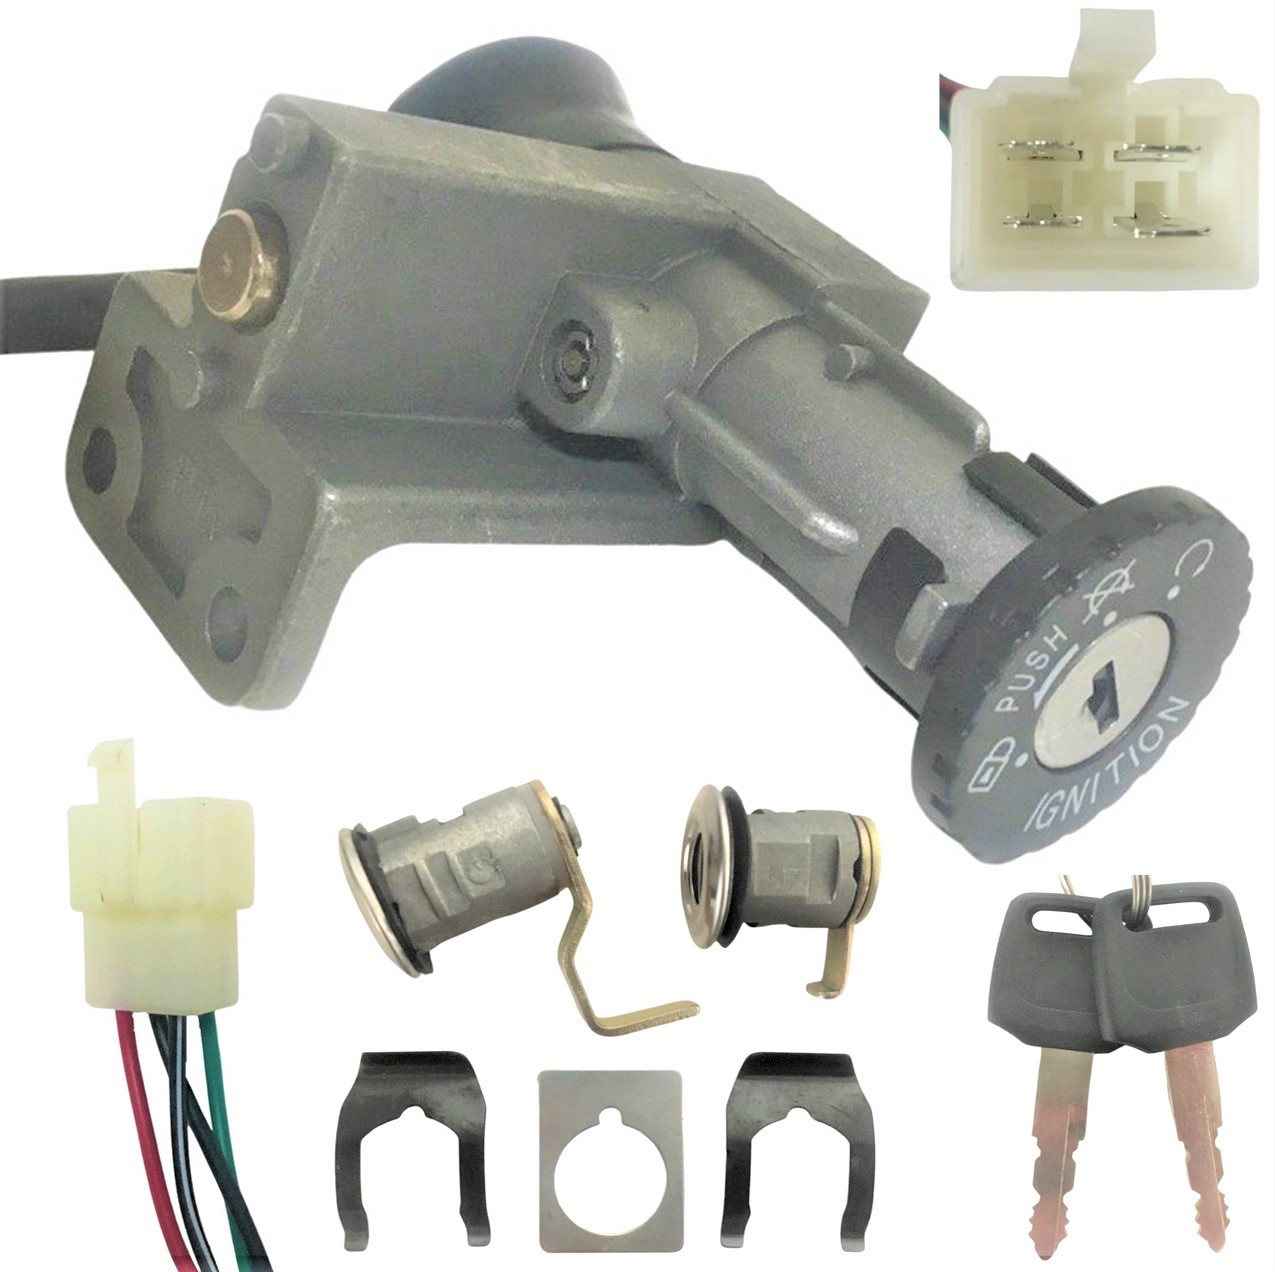 Ignition Switch Fits Many Chinese Scooters Tao Tao CY50A, Baja BE500, + 4 Pins in 4 Pin Female Jack Bolts Ctr to Ctr 30mm - Click Image to Close